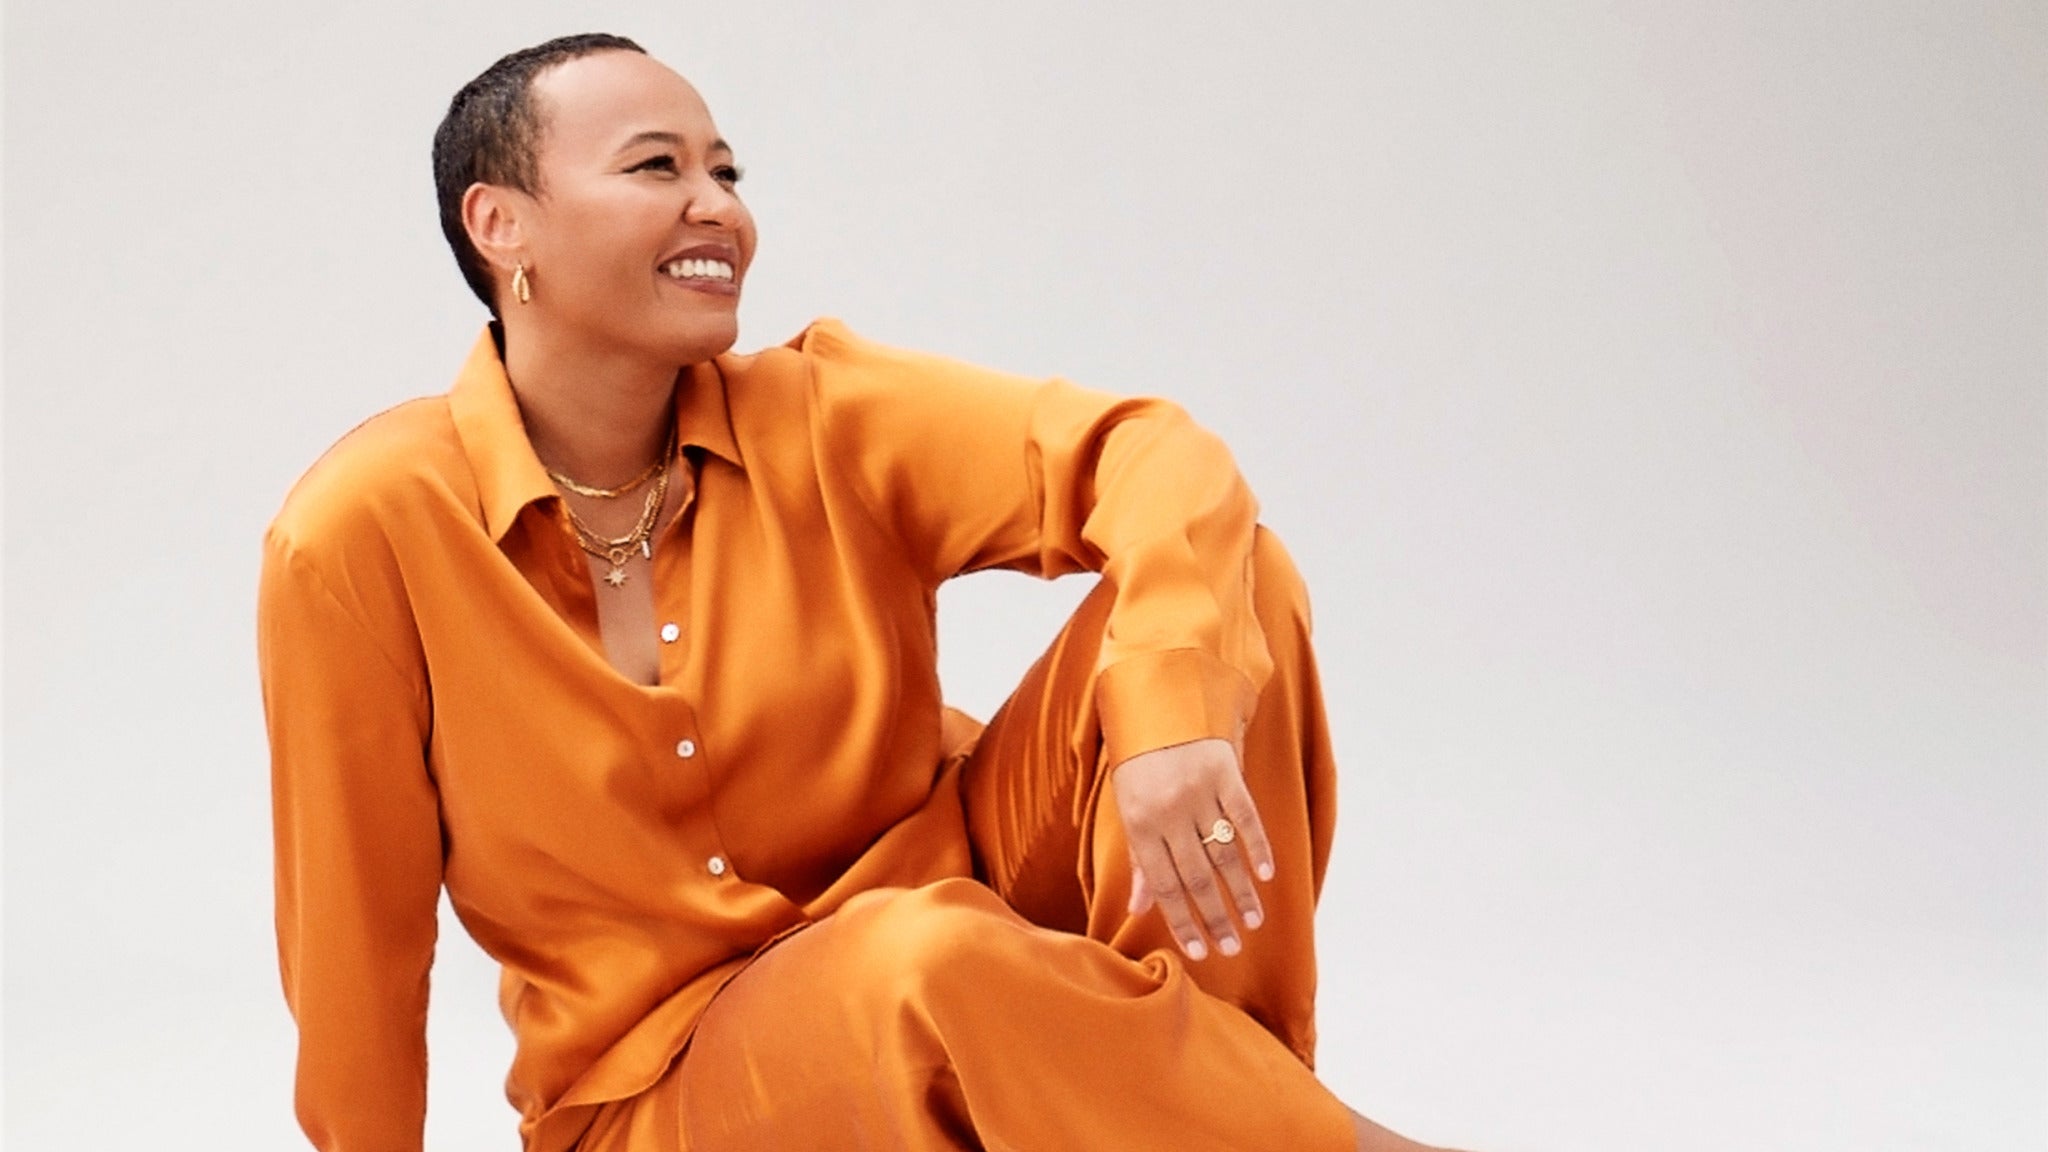 Emeli Sande: Brighter Days Tour - with full band Event Title Pic